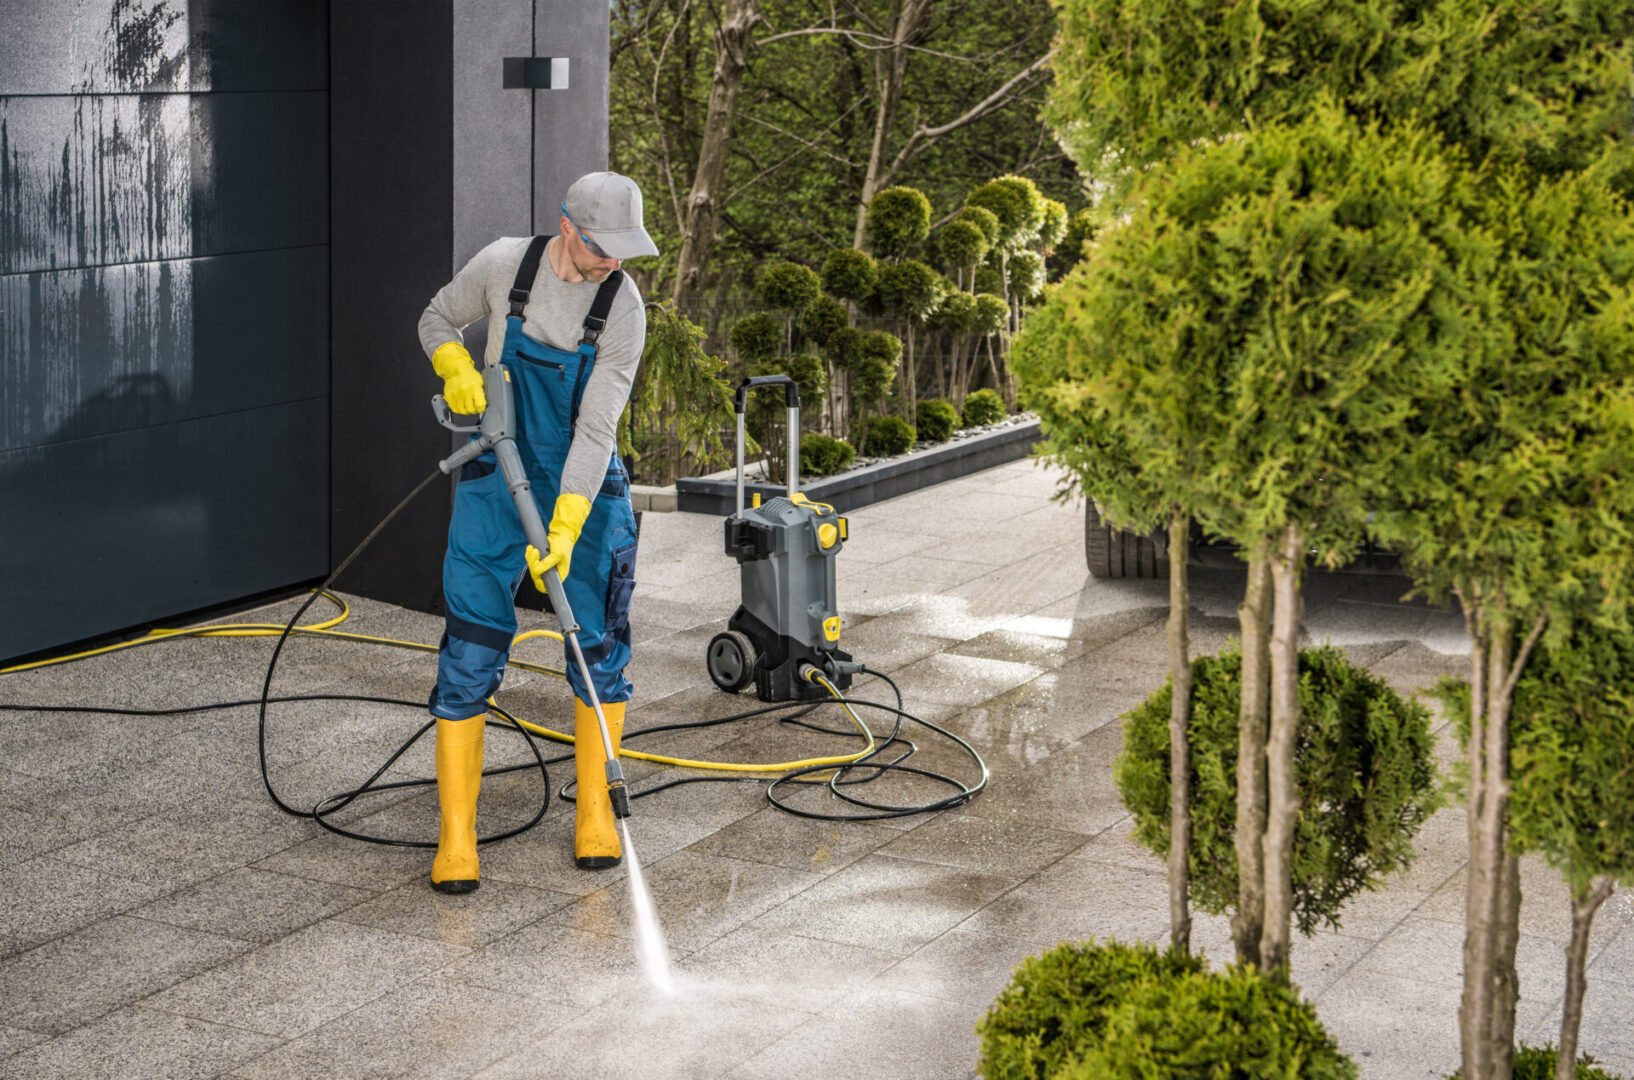 Caucasian Men Cleaning His Modern House Surroundings with a Powerful Pressure Washer. Washing Brick Made Driveway.